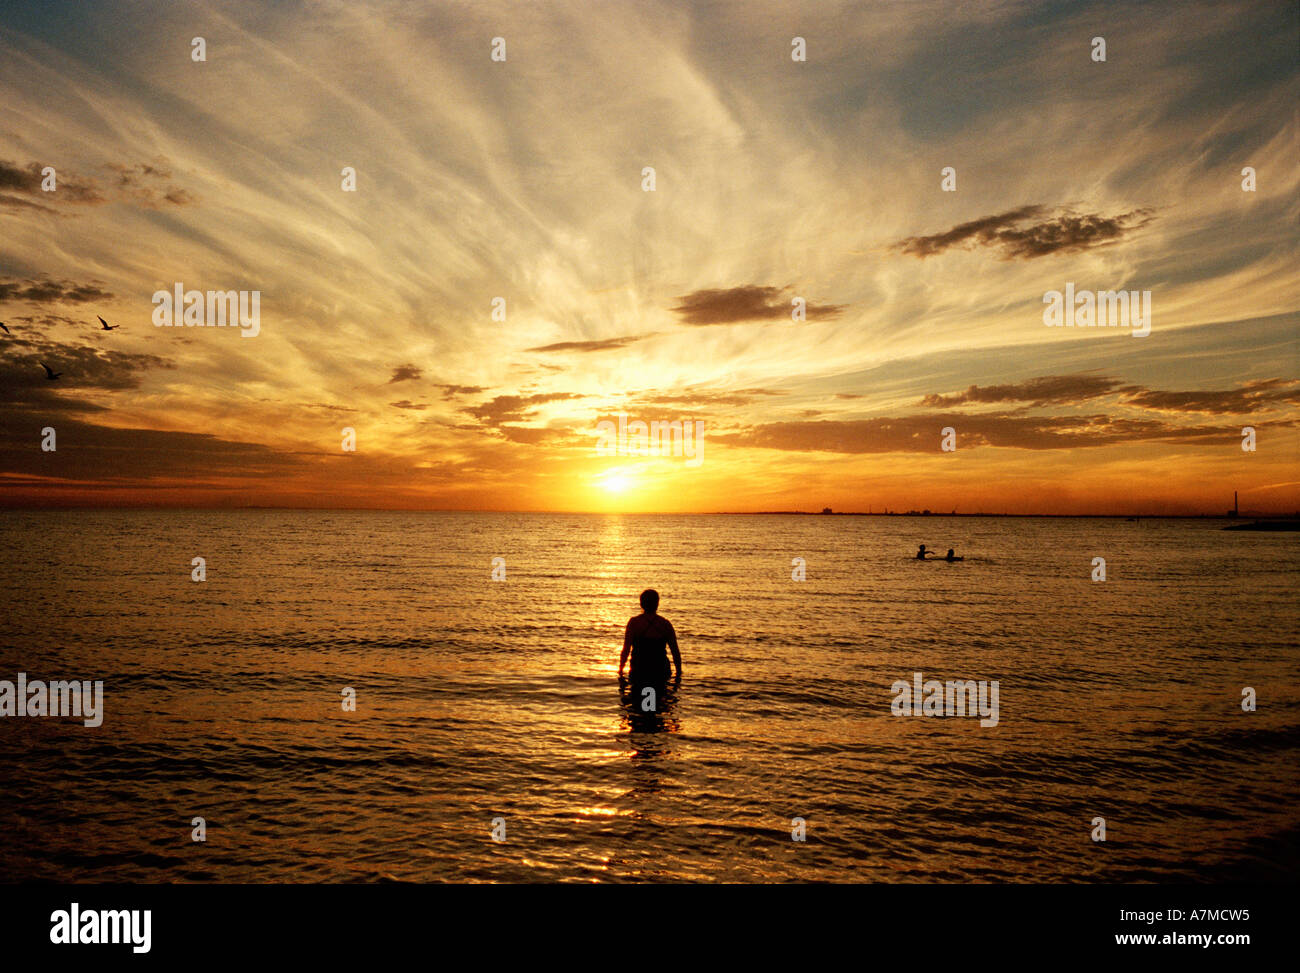 Man standing in sea at sunset Stock Photo